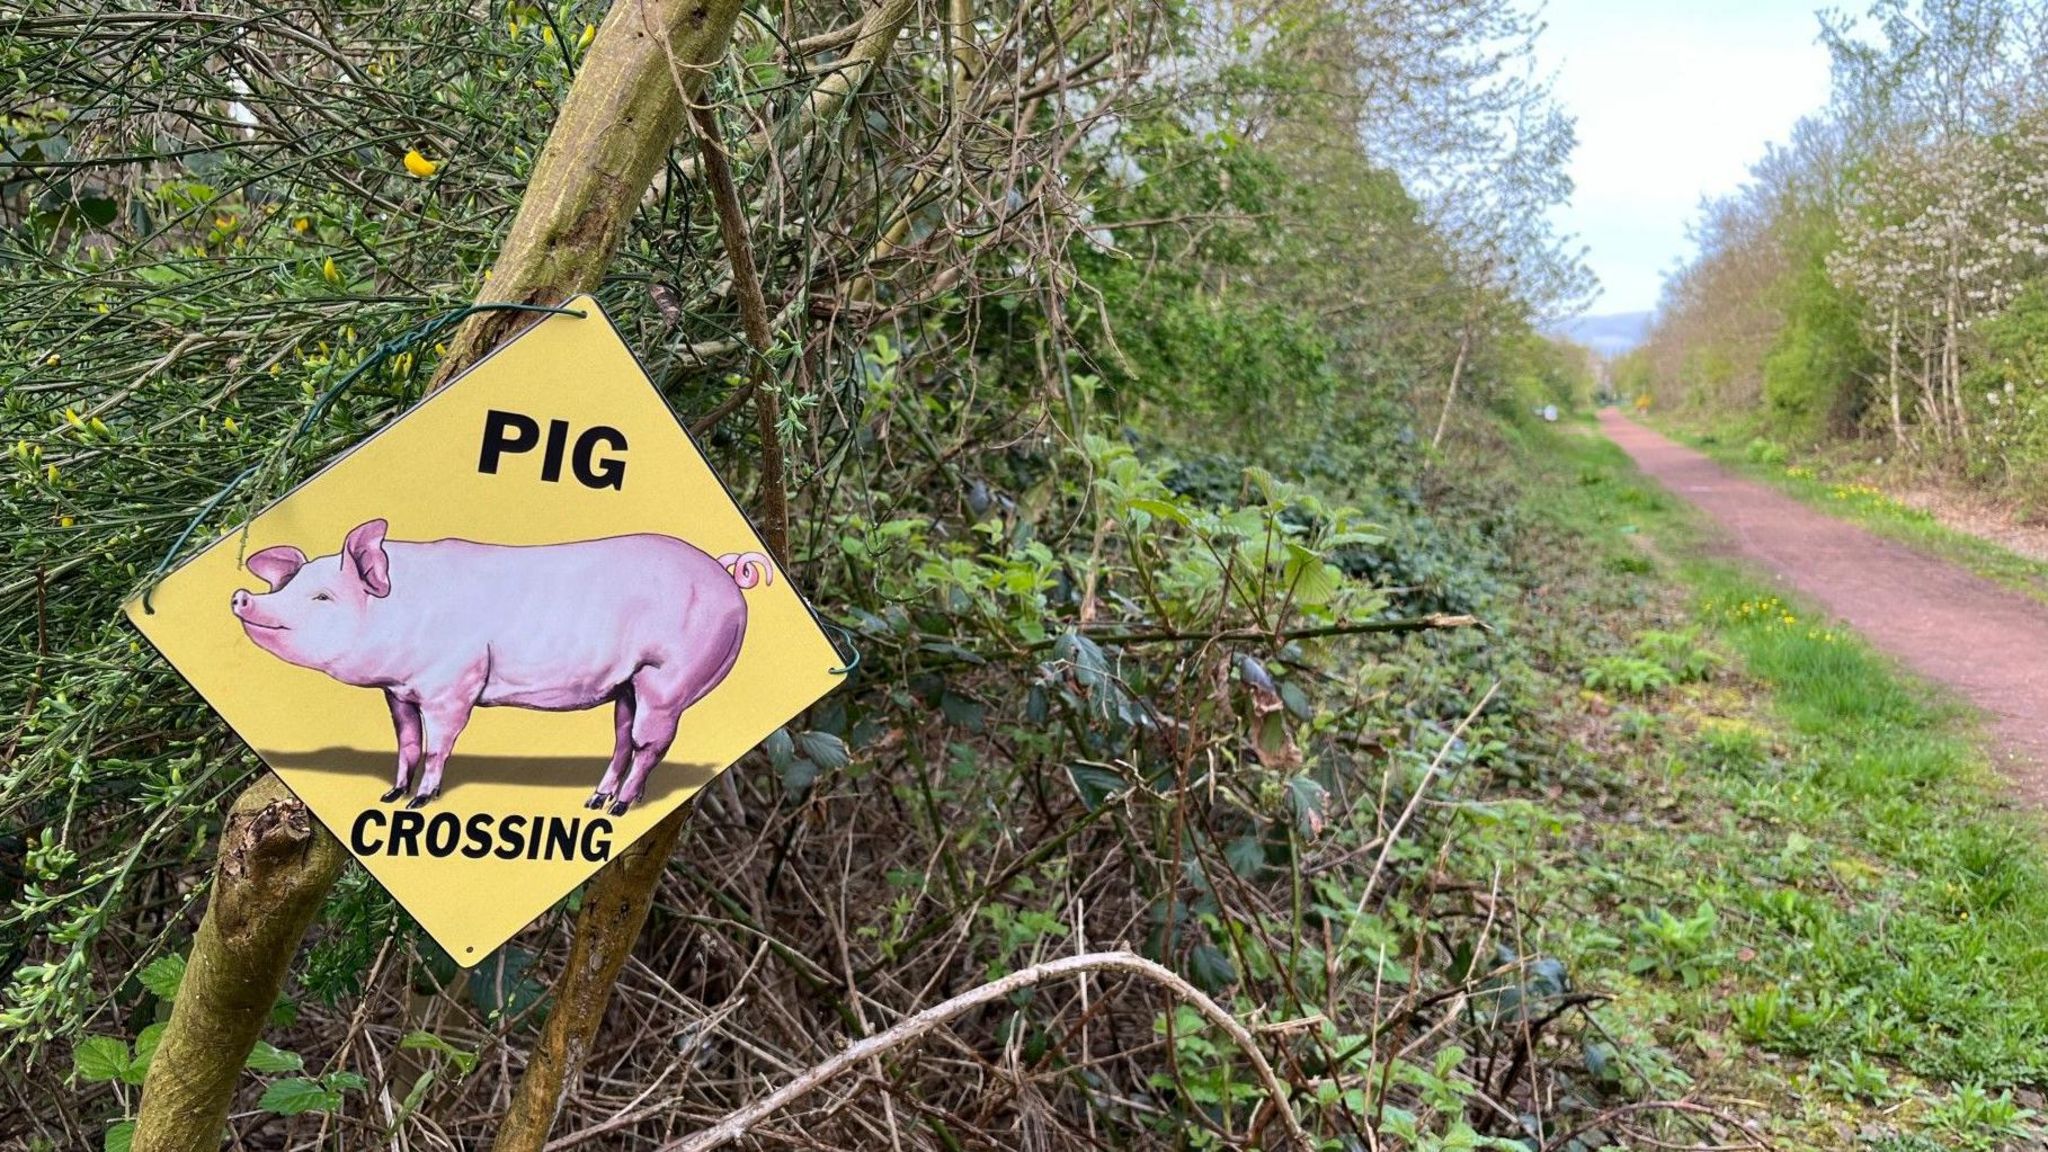 Pig crossing sign